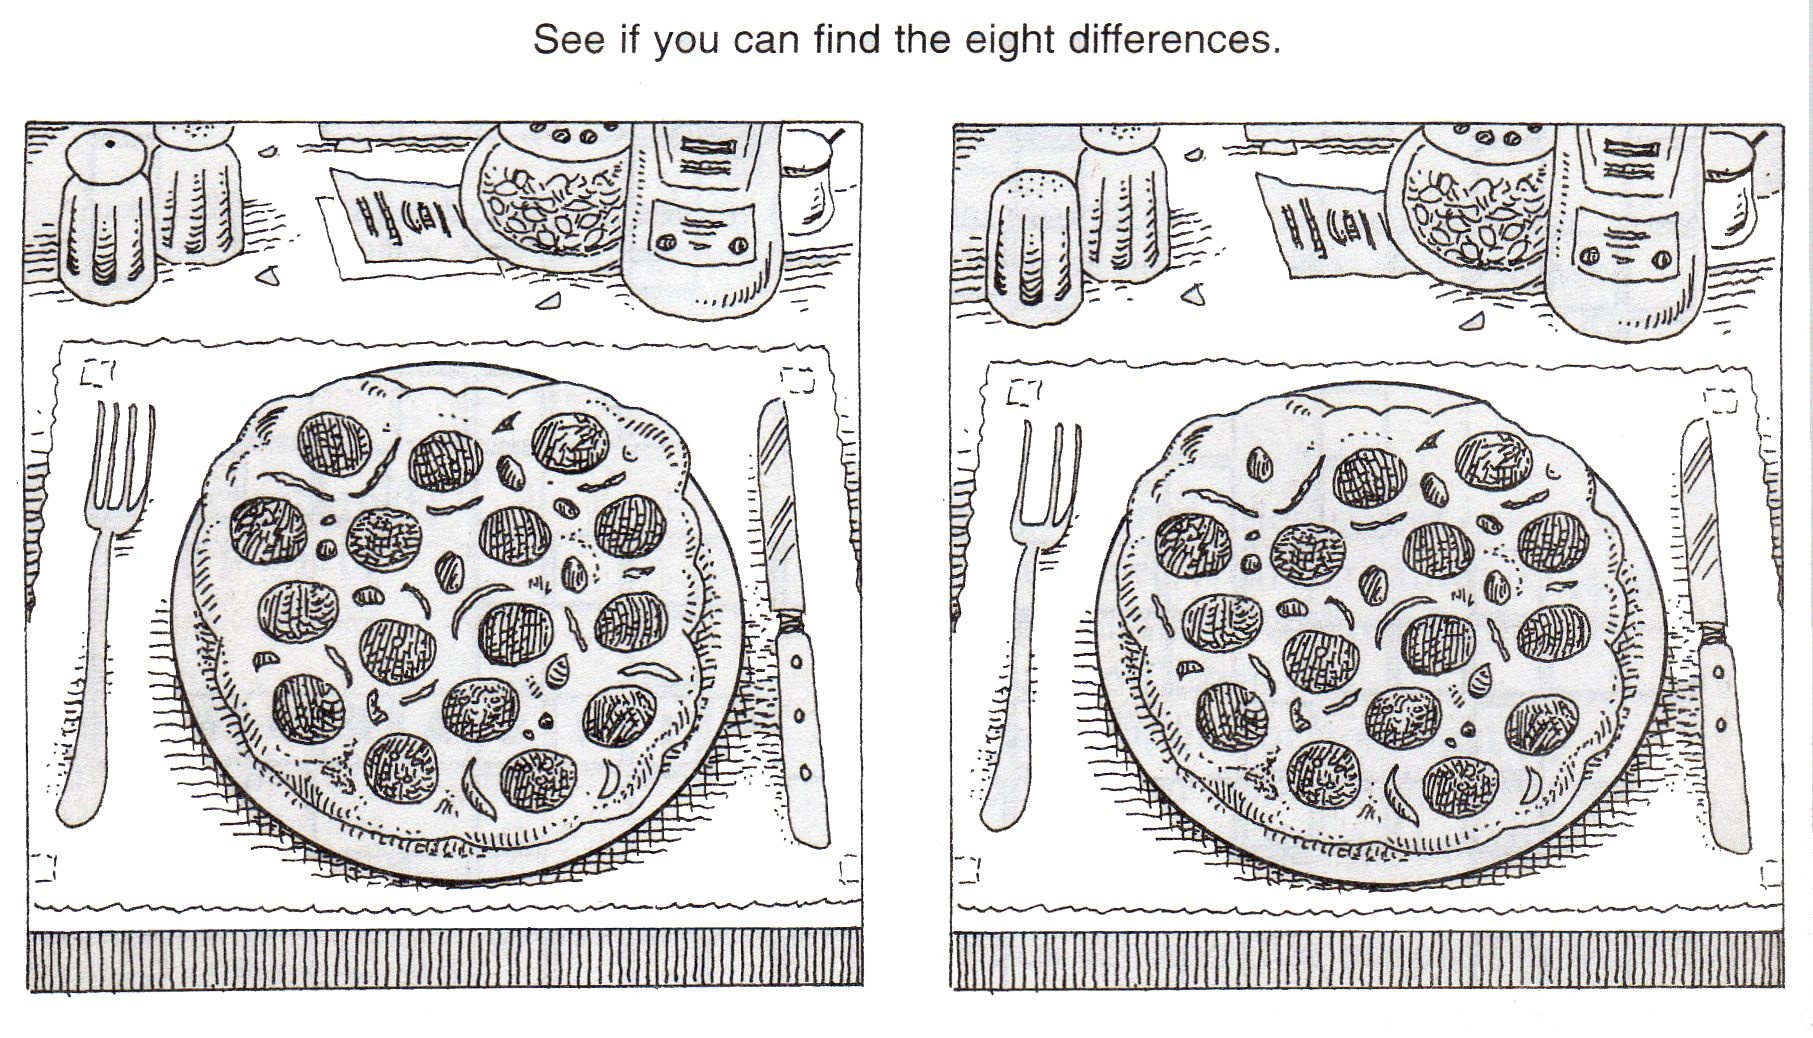 Free+Printable+Spot+The+Difference+Puzzles | Hg | Spot The - Free Printable Spot The Difference Games For Adults